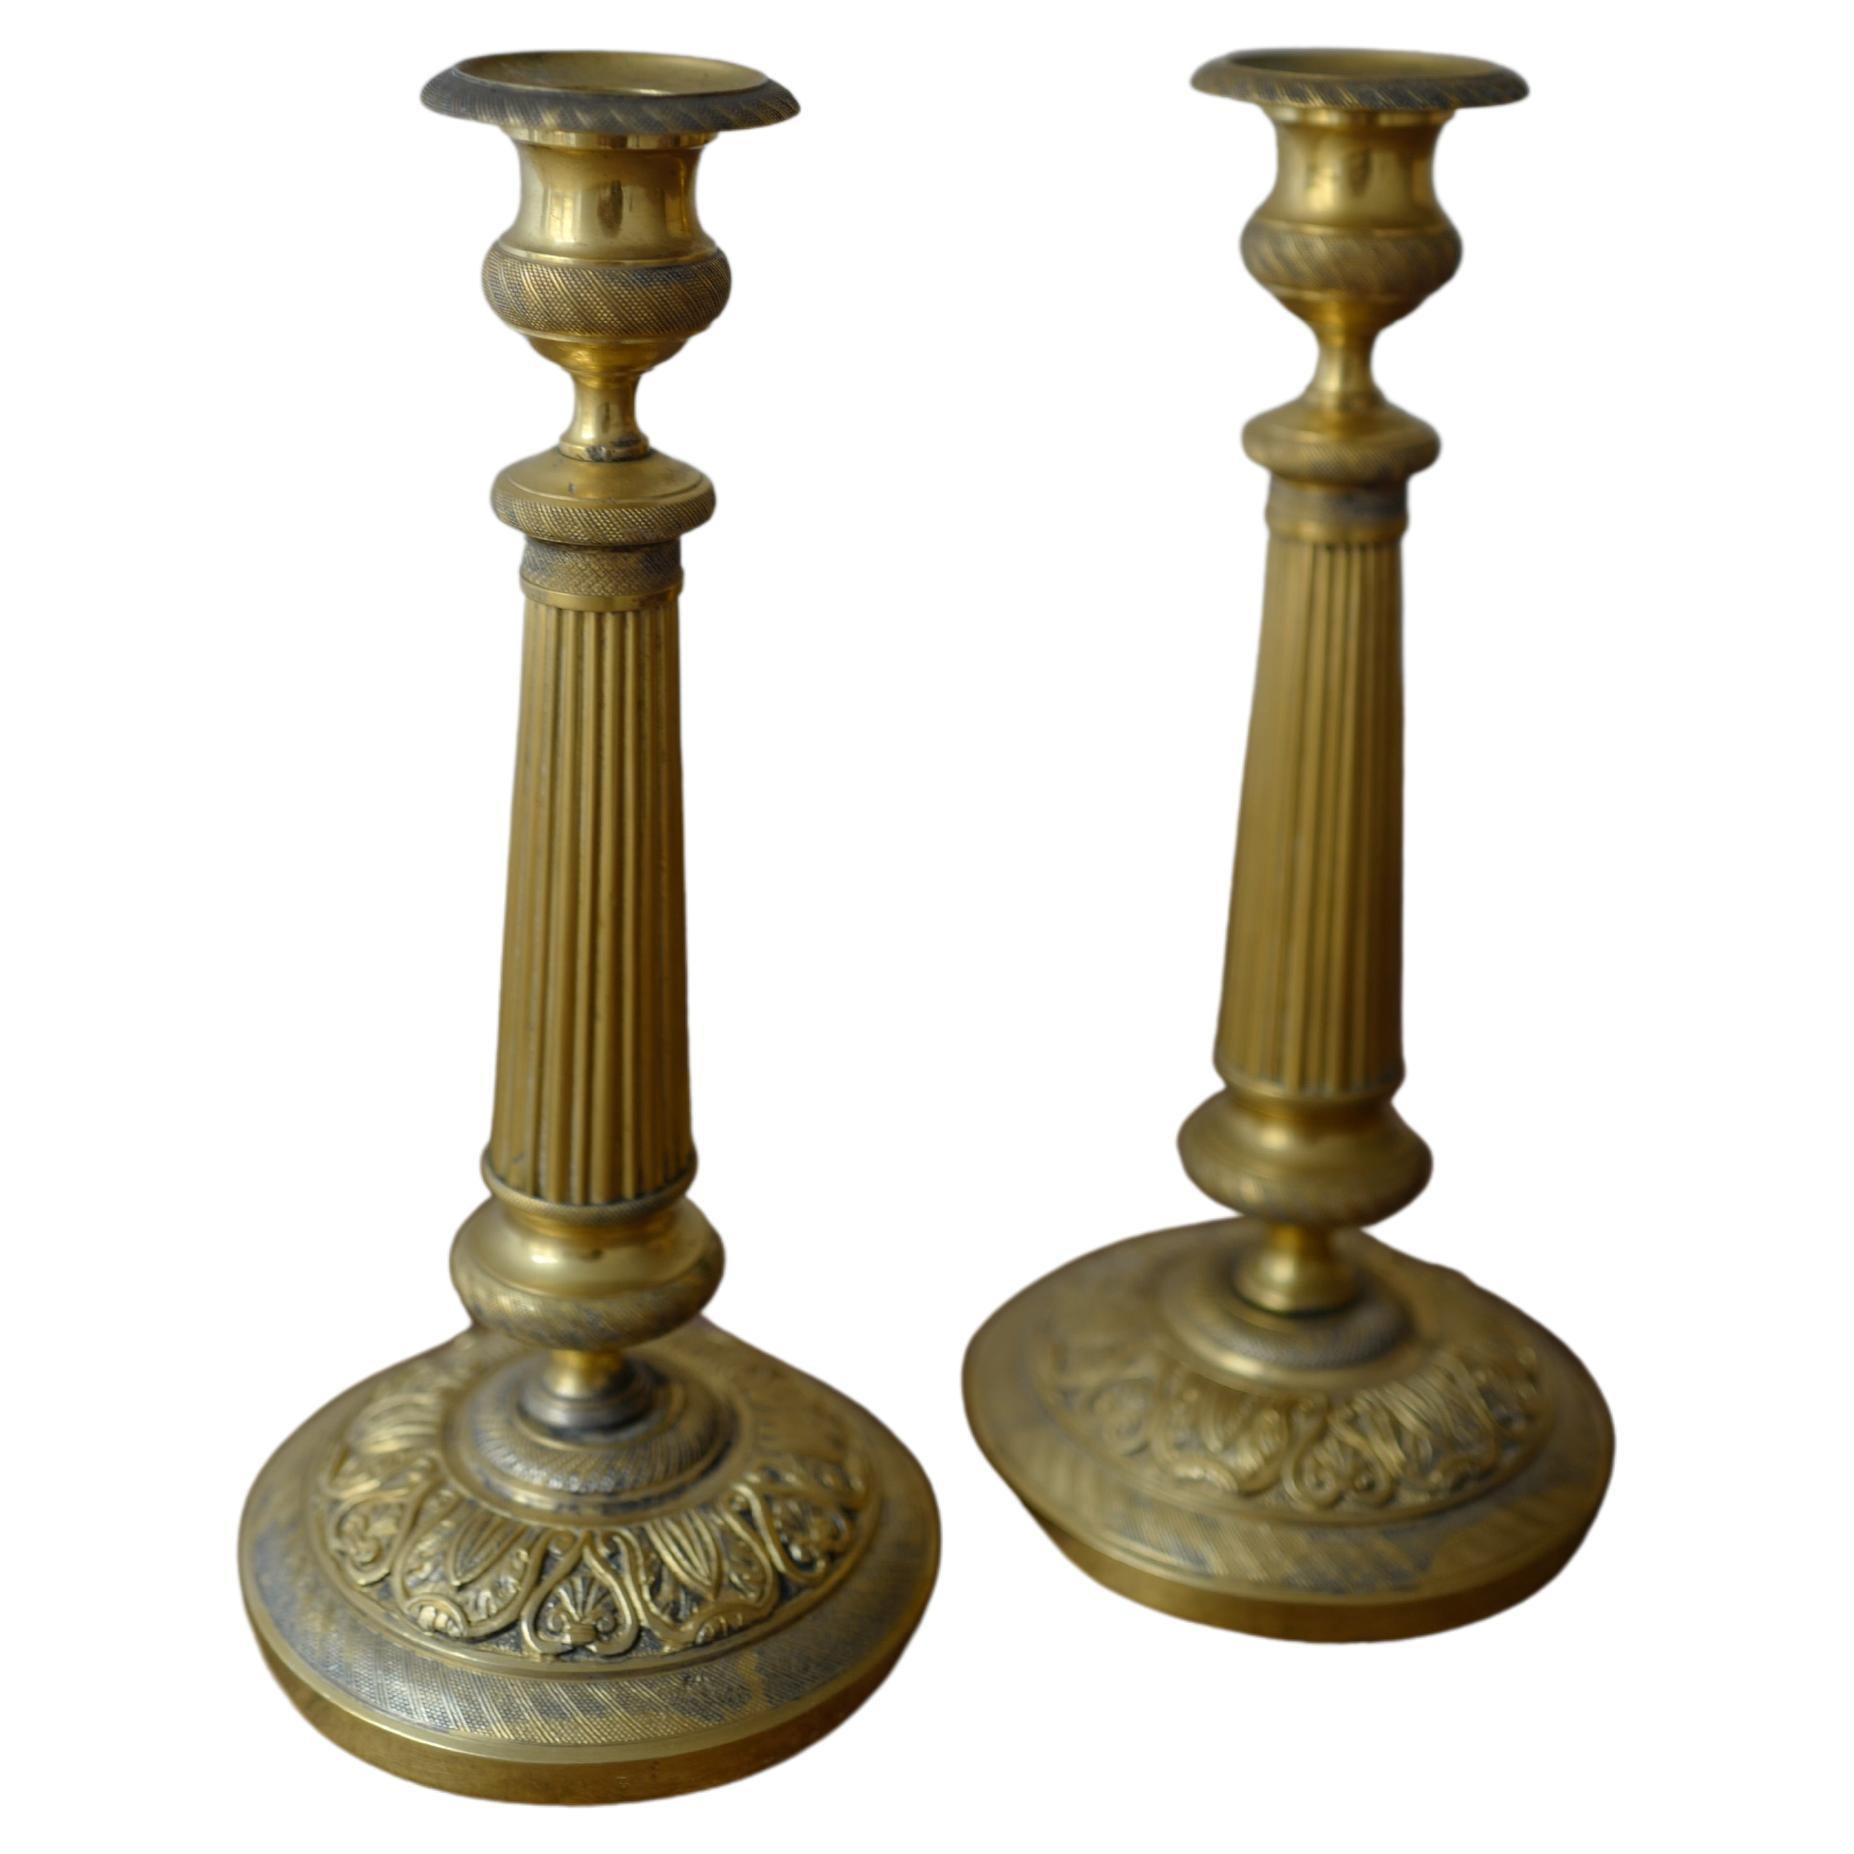 Pair of Early 19th Century French Empire Bronze Candlesticks